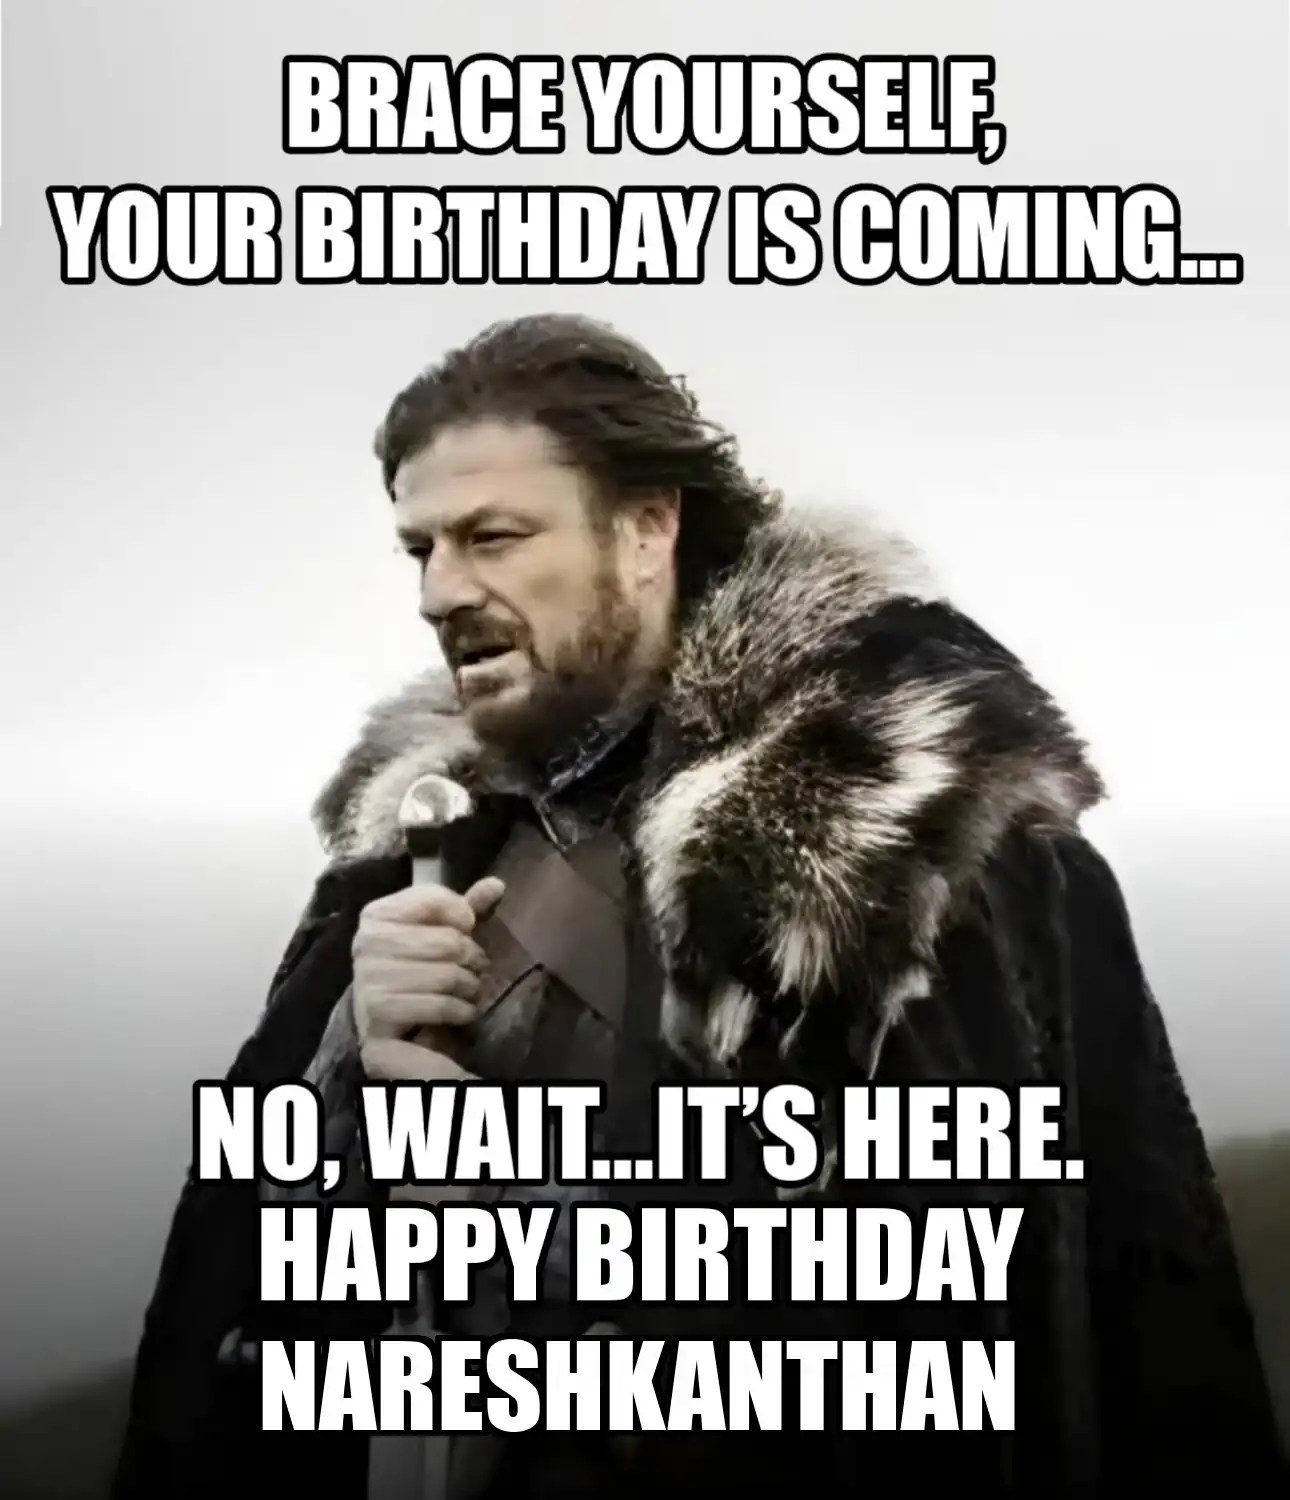 Happy Birthday Nareshkanthan Brace Yourself Your Birthday Is Coming Meme